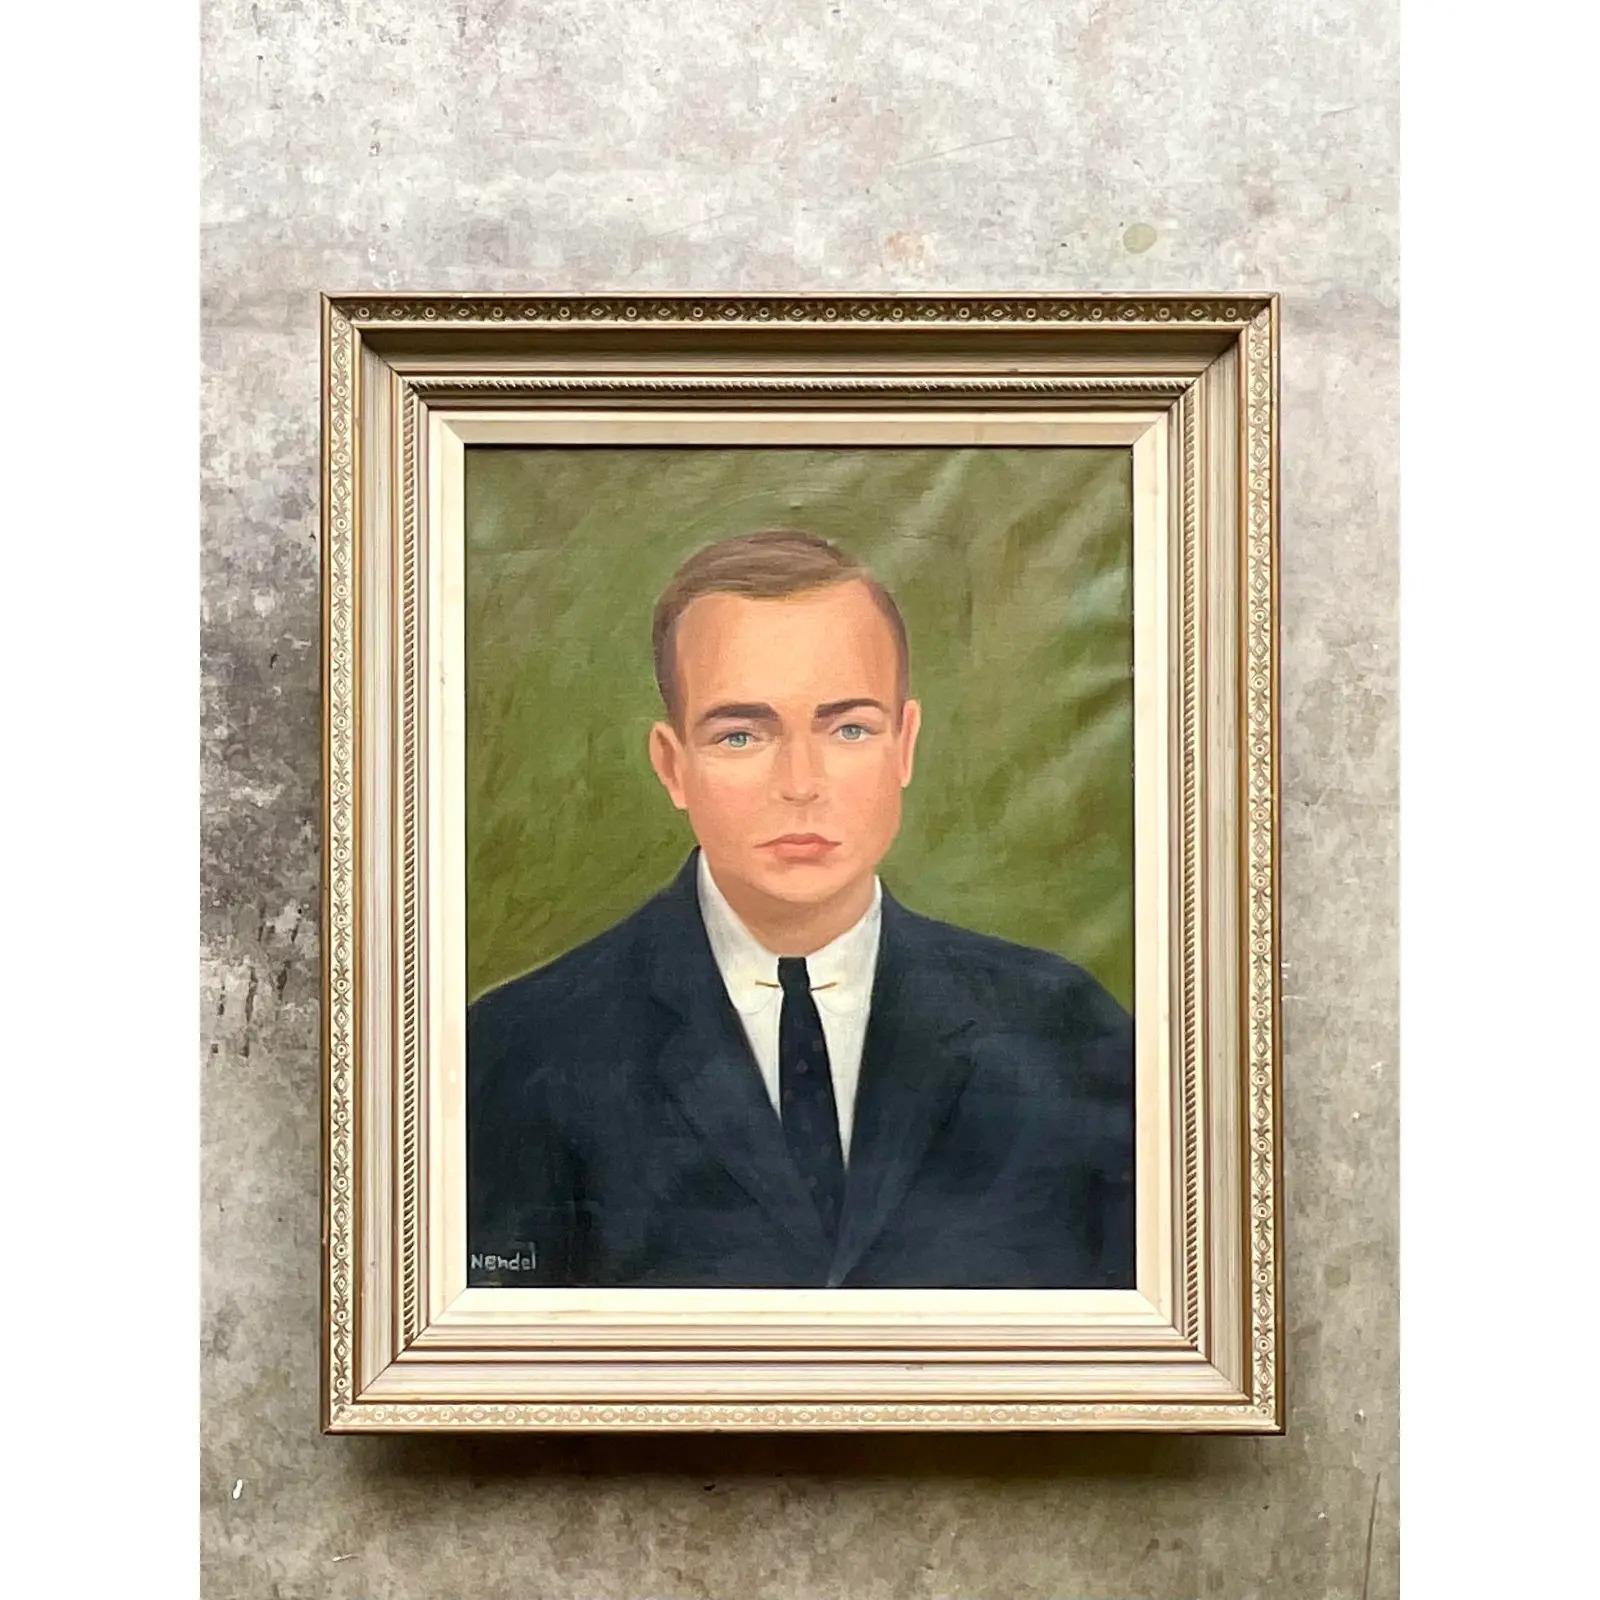 Fantastic vintage MCM oil portrait. A gorgeous composition of a snappy young man. Great period colors. Signed by the artist. Acquired from a Palm Beach estate.